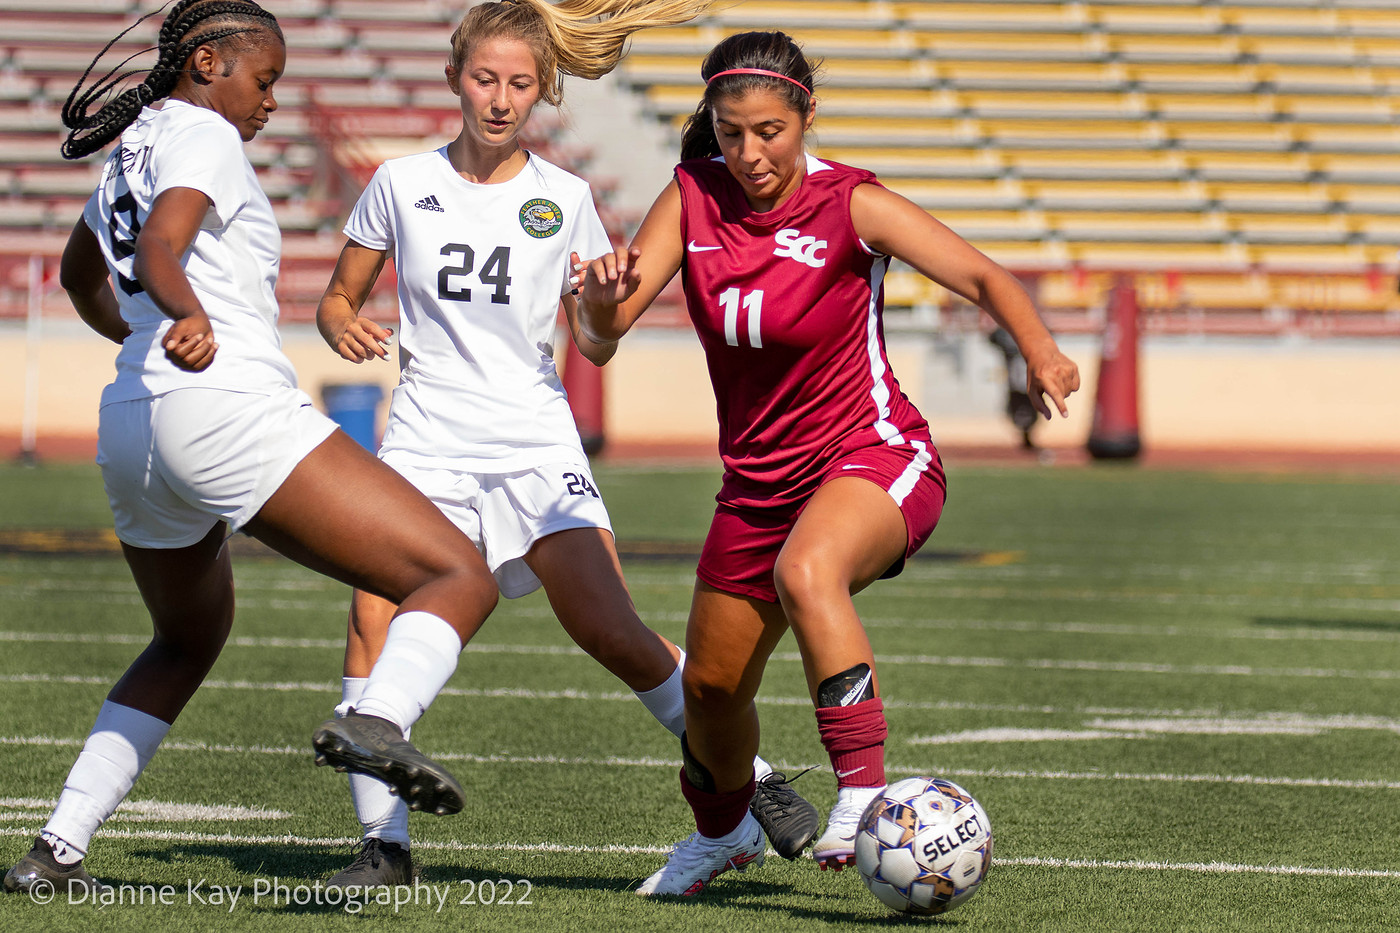 J. Ruiz scores her team leading 11th goal of the season, but two first half goals by the Wolverines gave them a 2-1 win